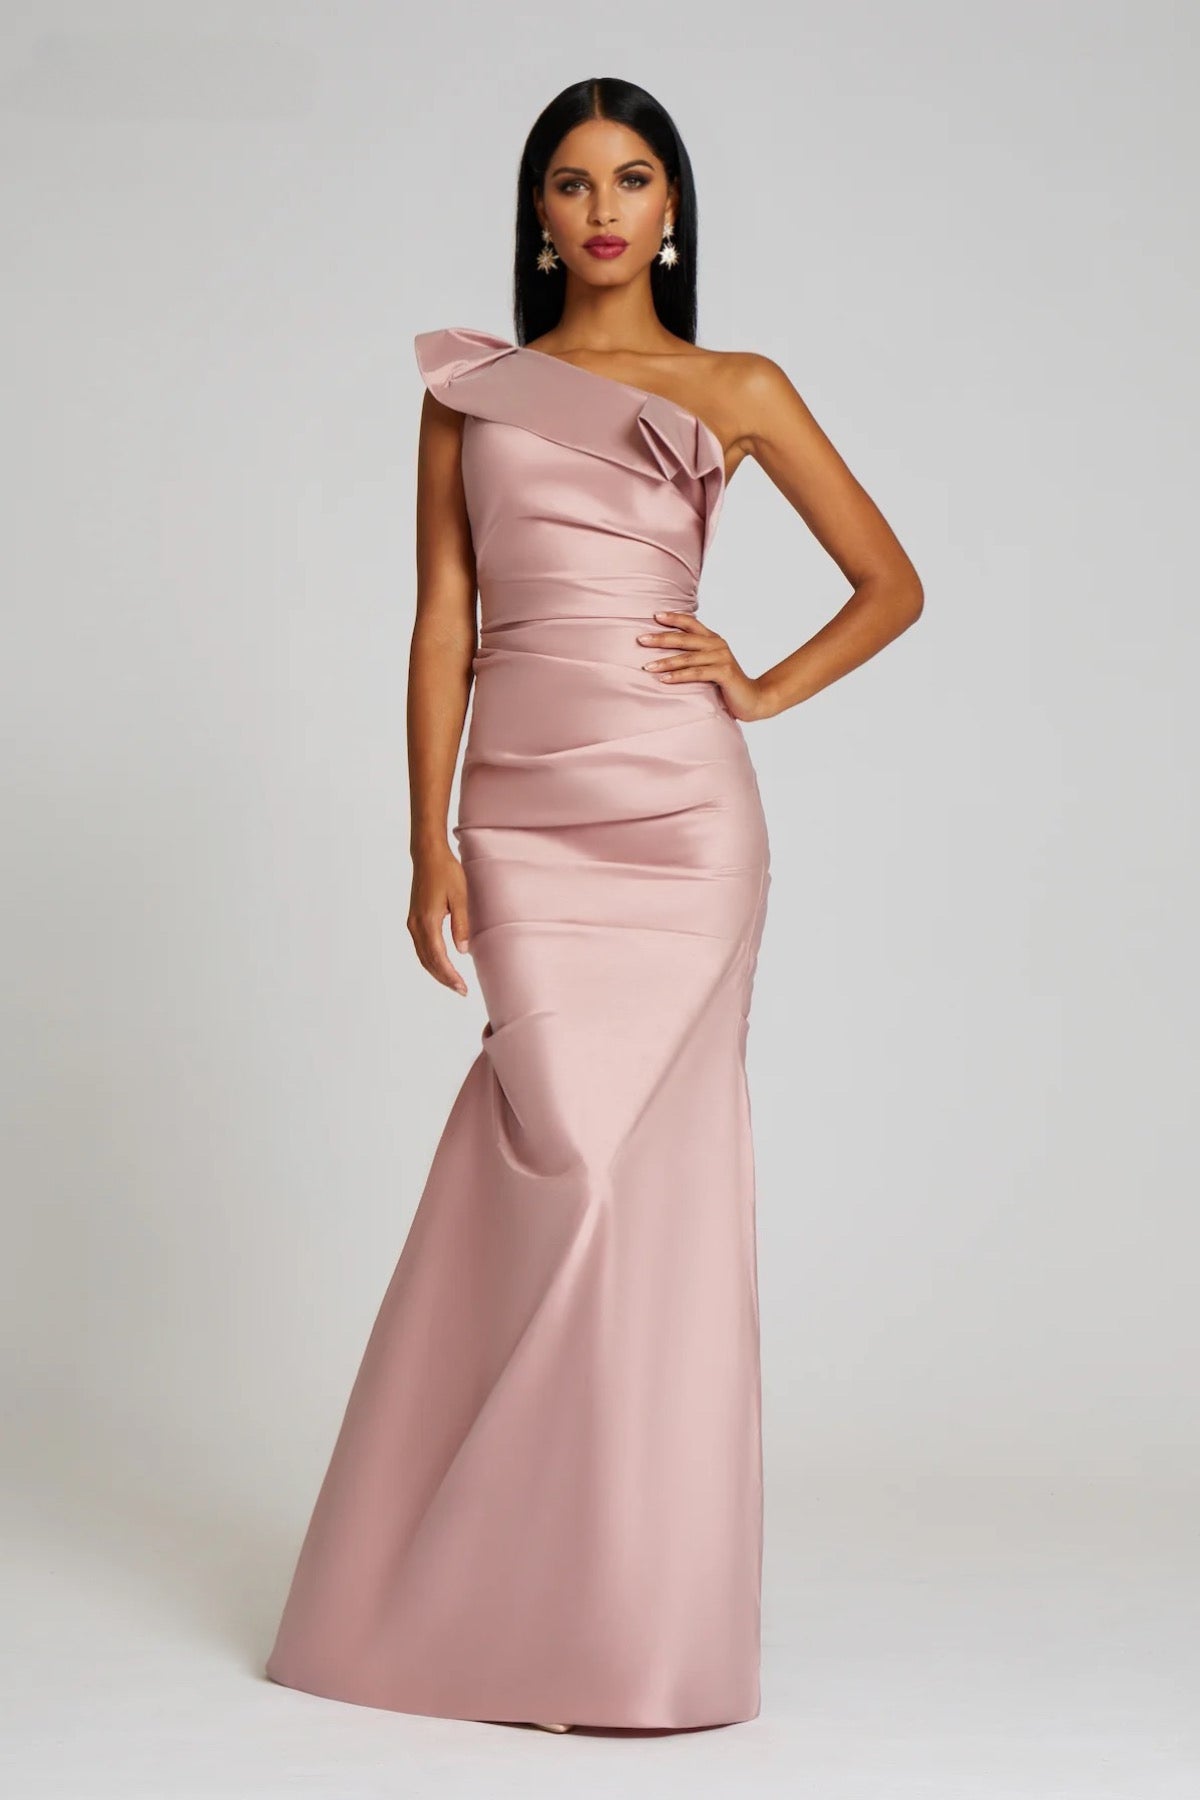 A stunning floor-length taffeta gown by Teri Jon, featuring a one-shoulder design with draped detailing, perfect for mother of the bride or groom occasions, black tie parties, and galas. Available at Madeline's Boutique in Toronto and Boca Raton.  Picture is of model wearing the dress in blush color.